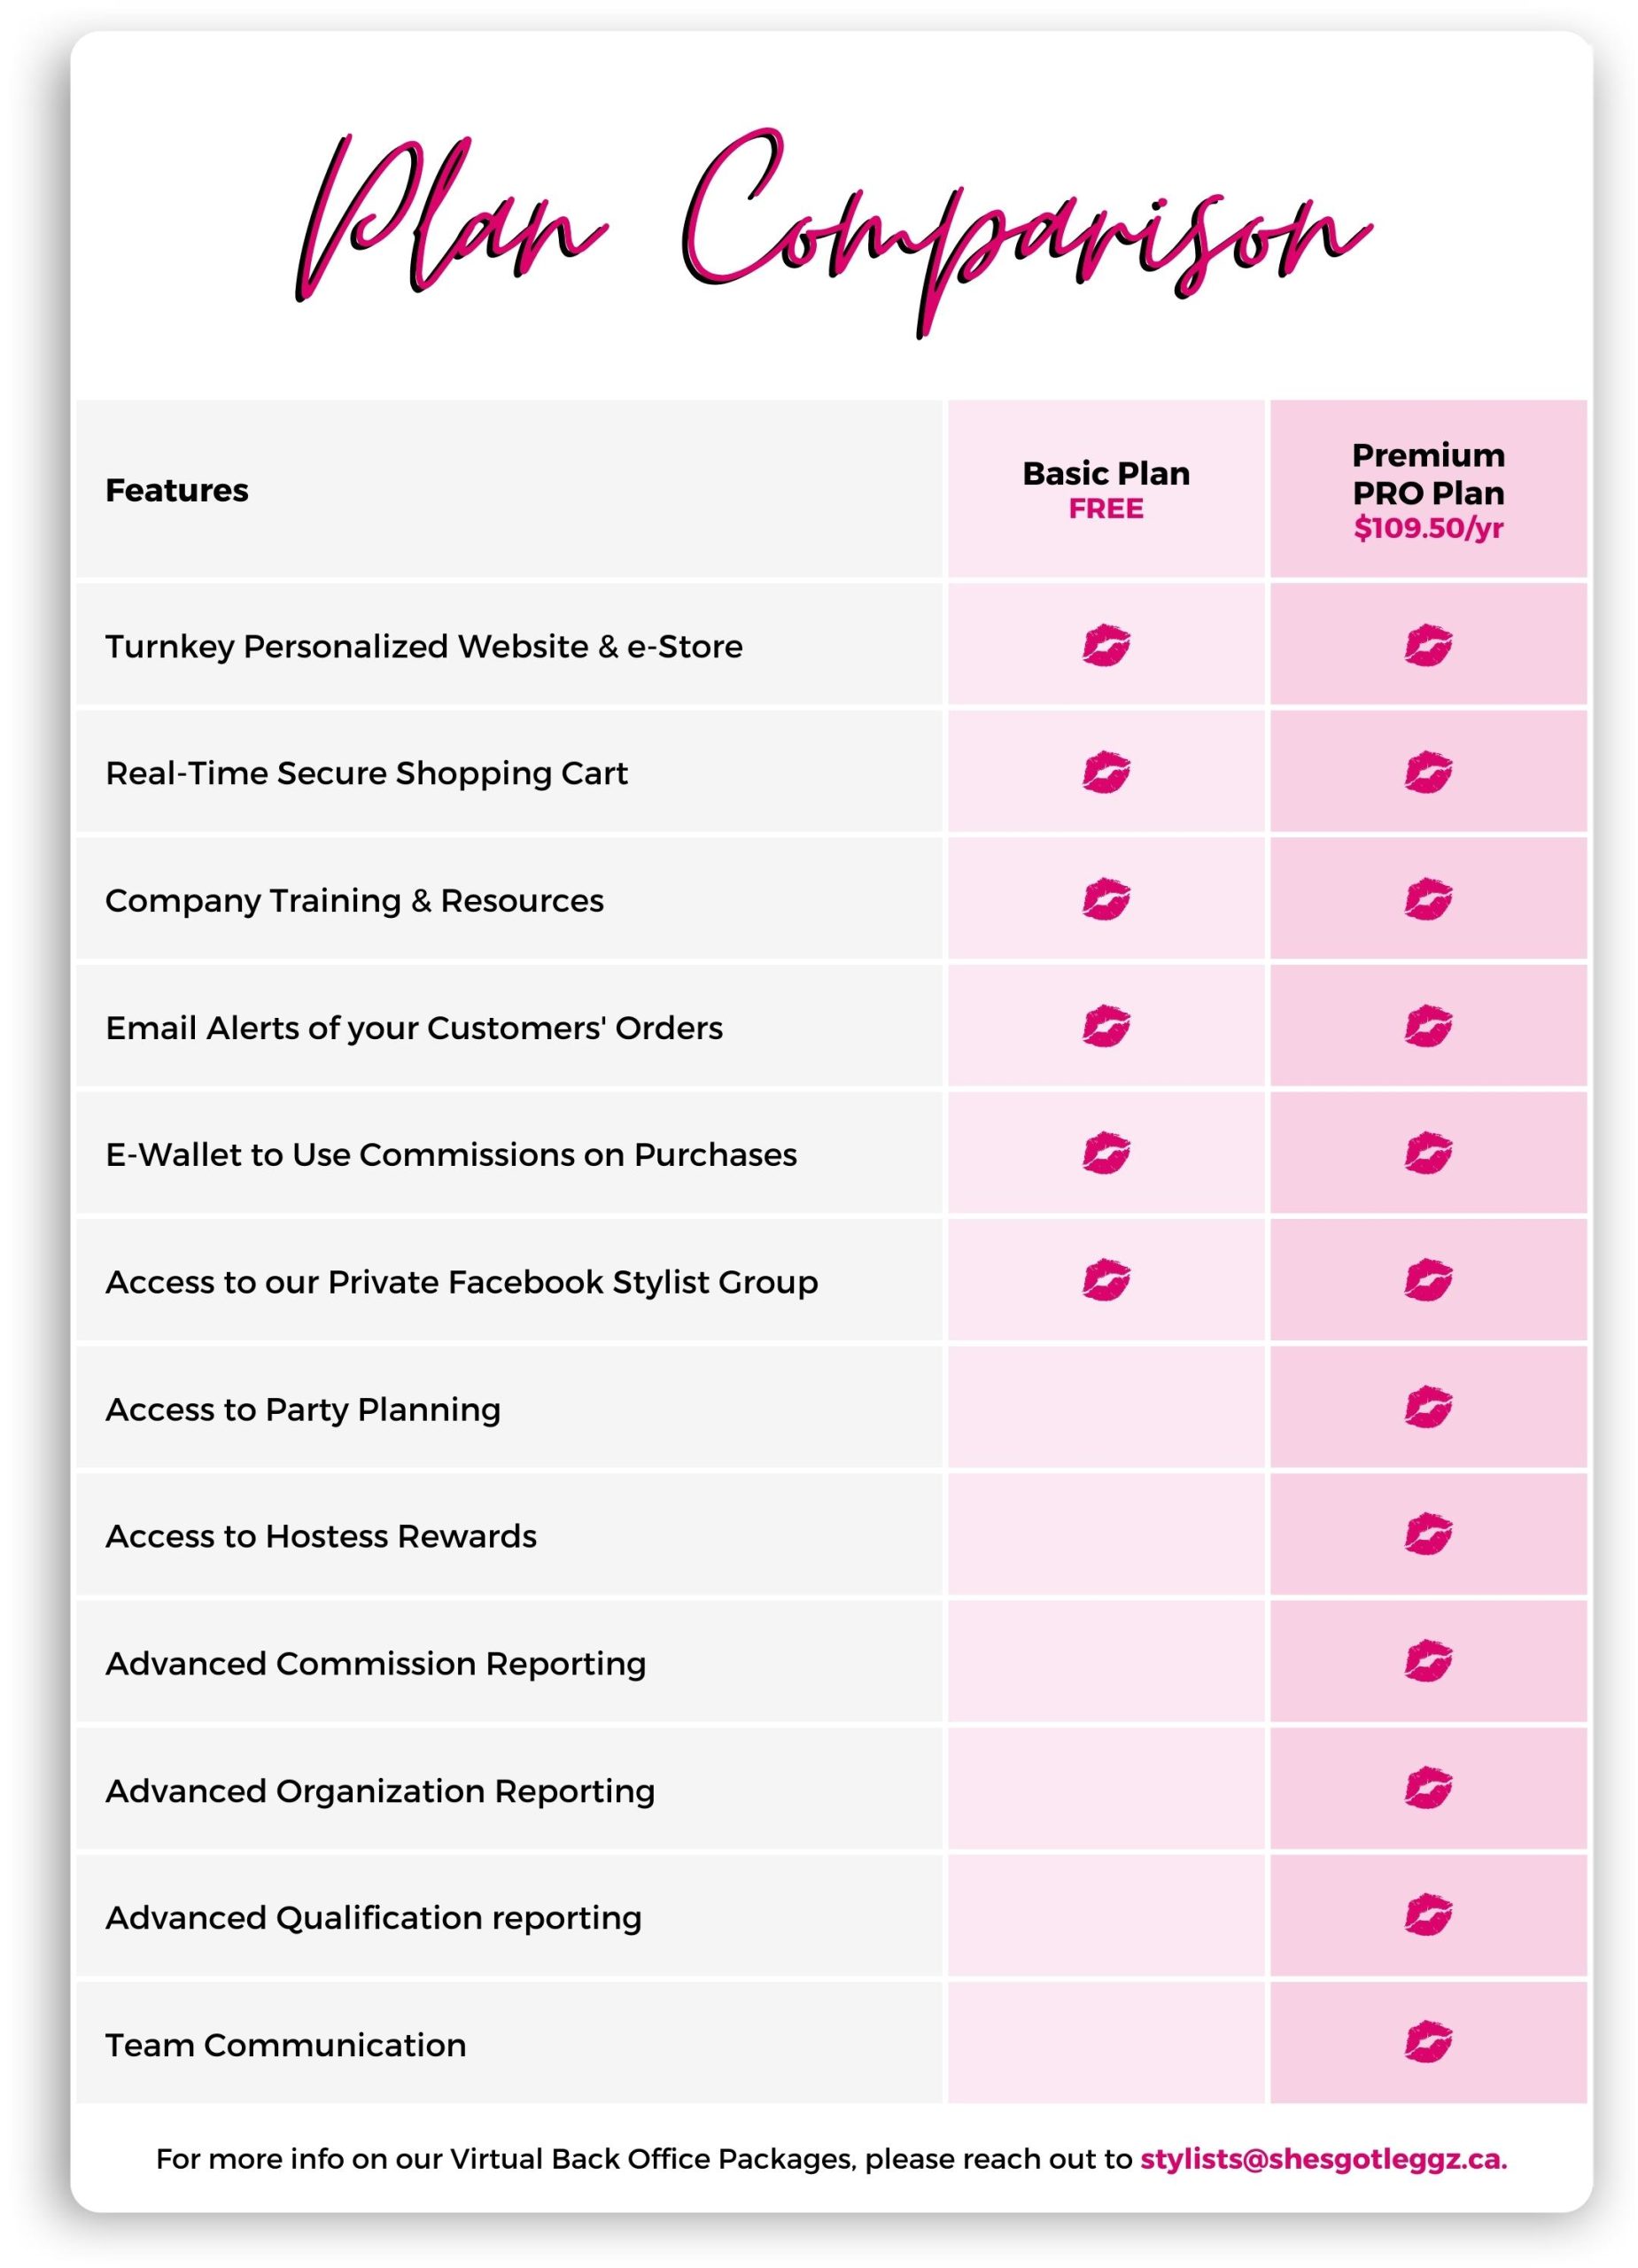 Comparison chart for our Virtual Back Office Packages. This chart compares the features of our Basic Plan and our Premium Pro Plan.